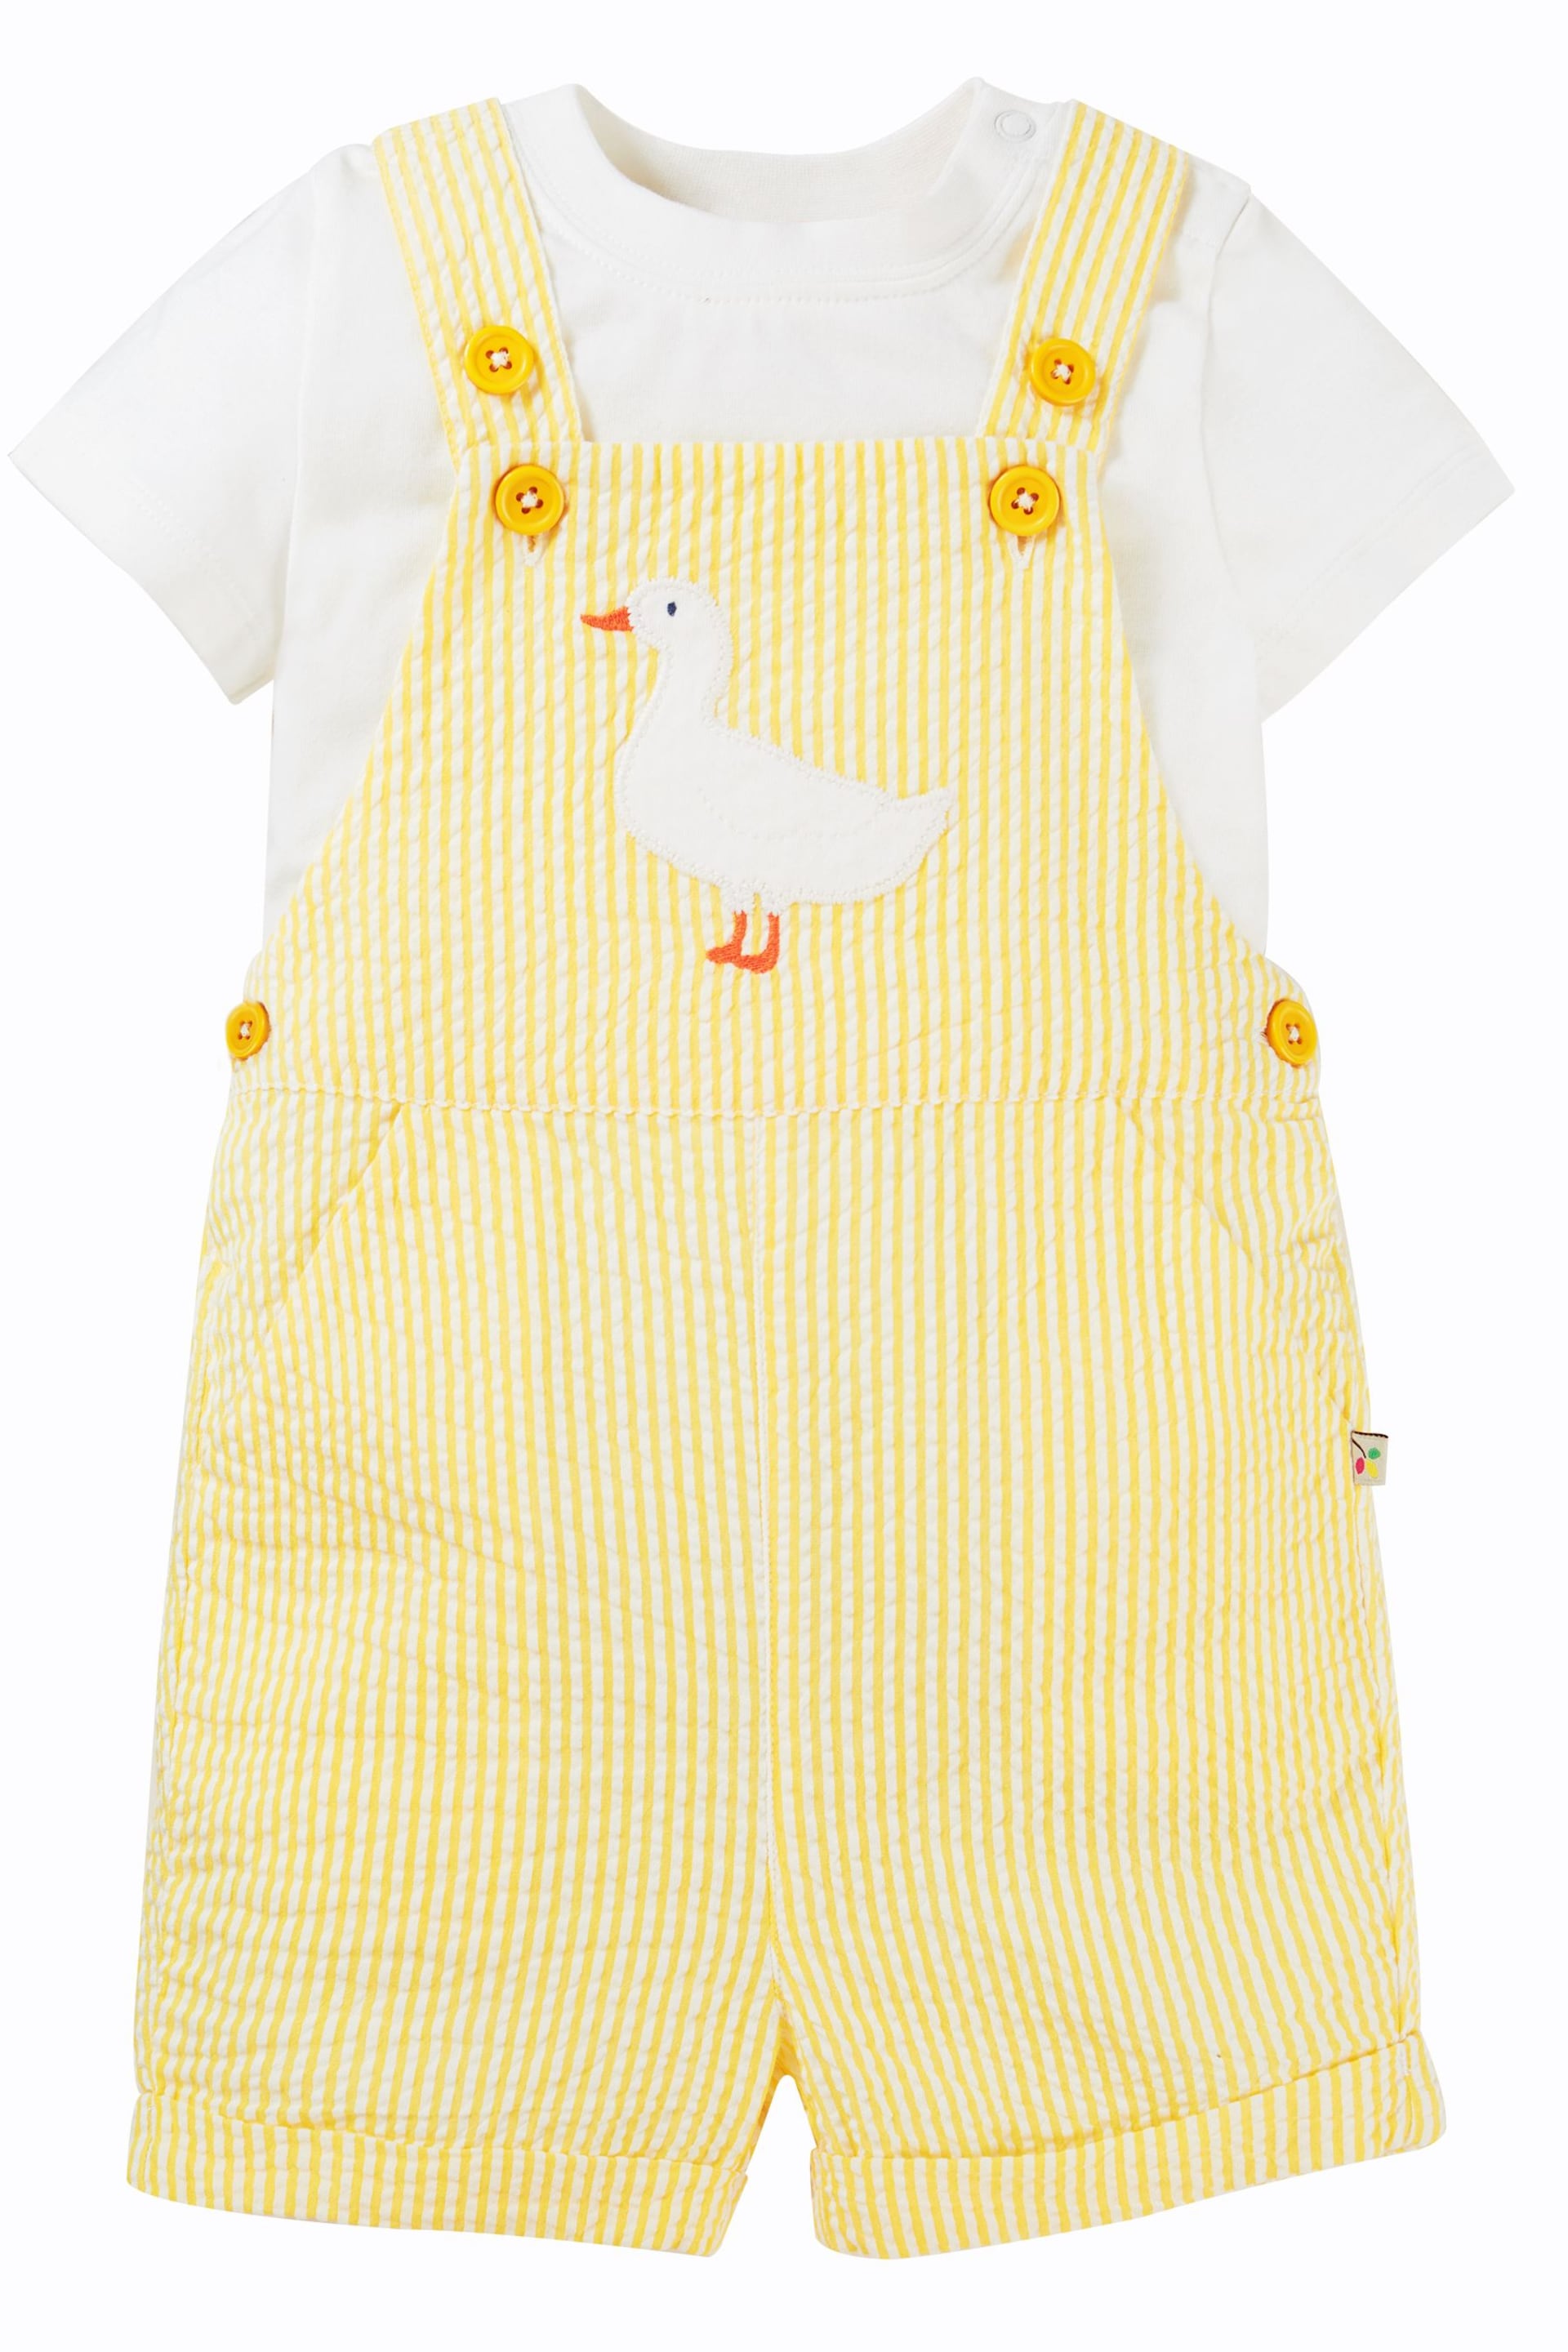 Frugi Yellow Seersucker Easter Duck T-Shirt And Short Dungaree Outfit Set - Image 2 of 6